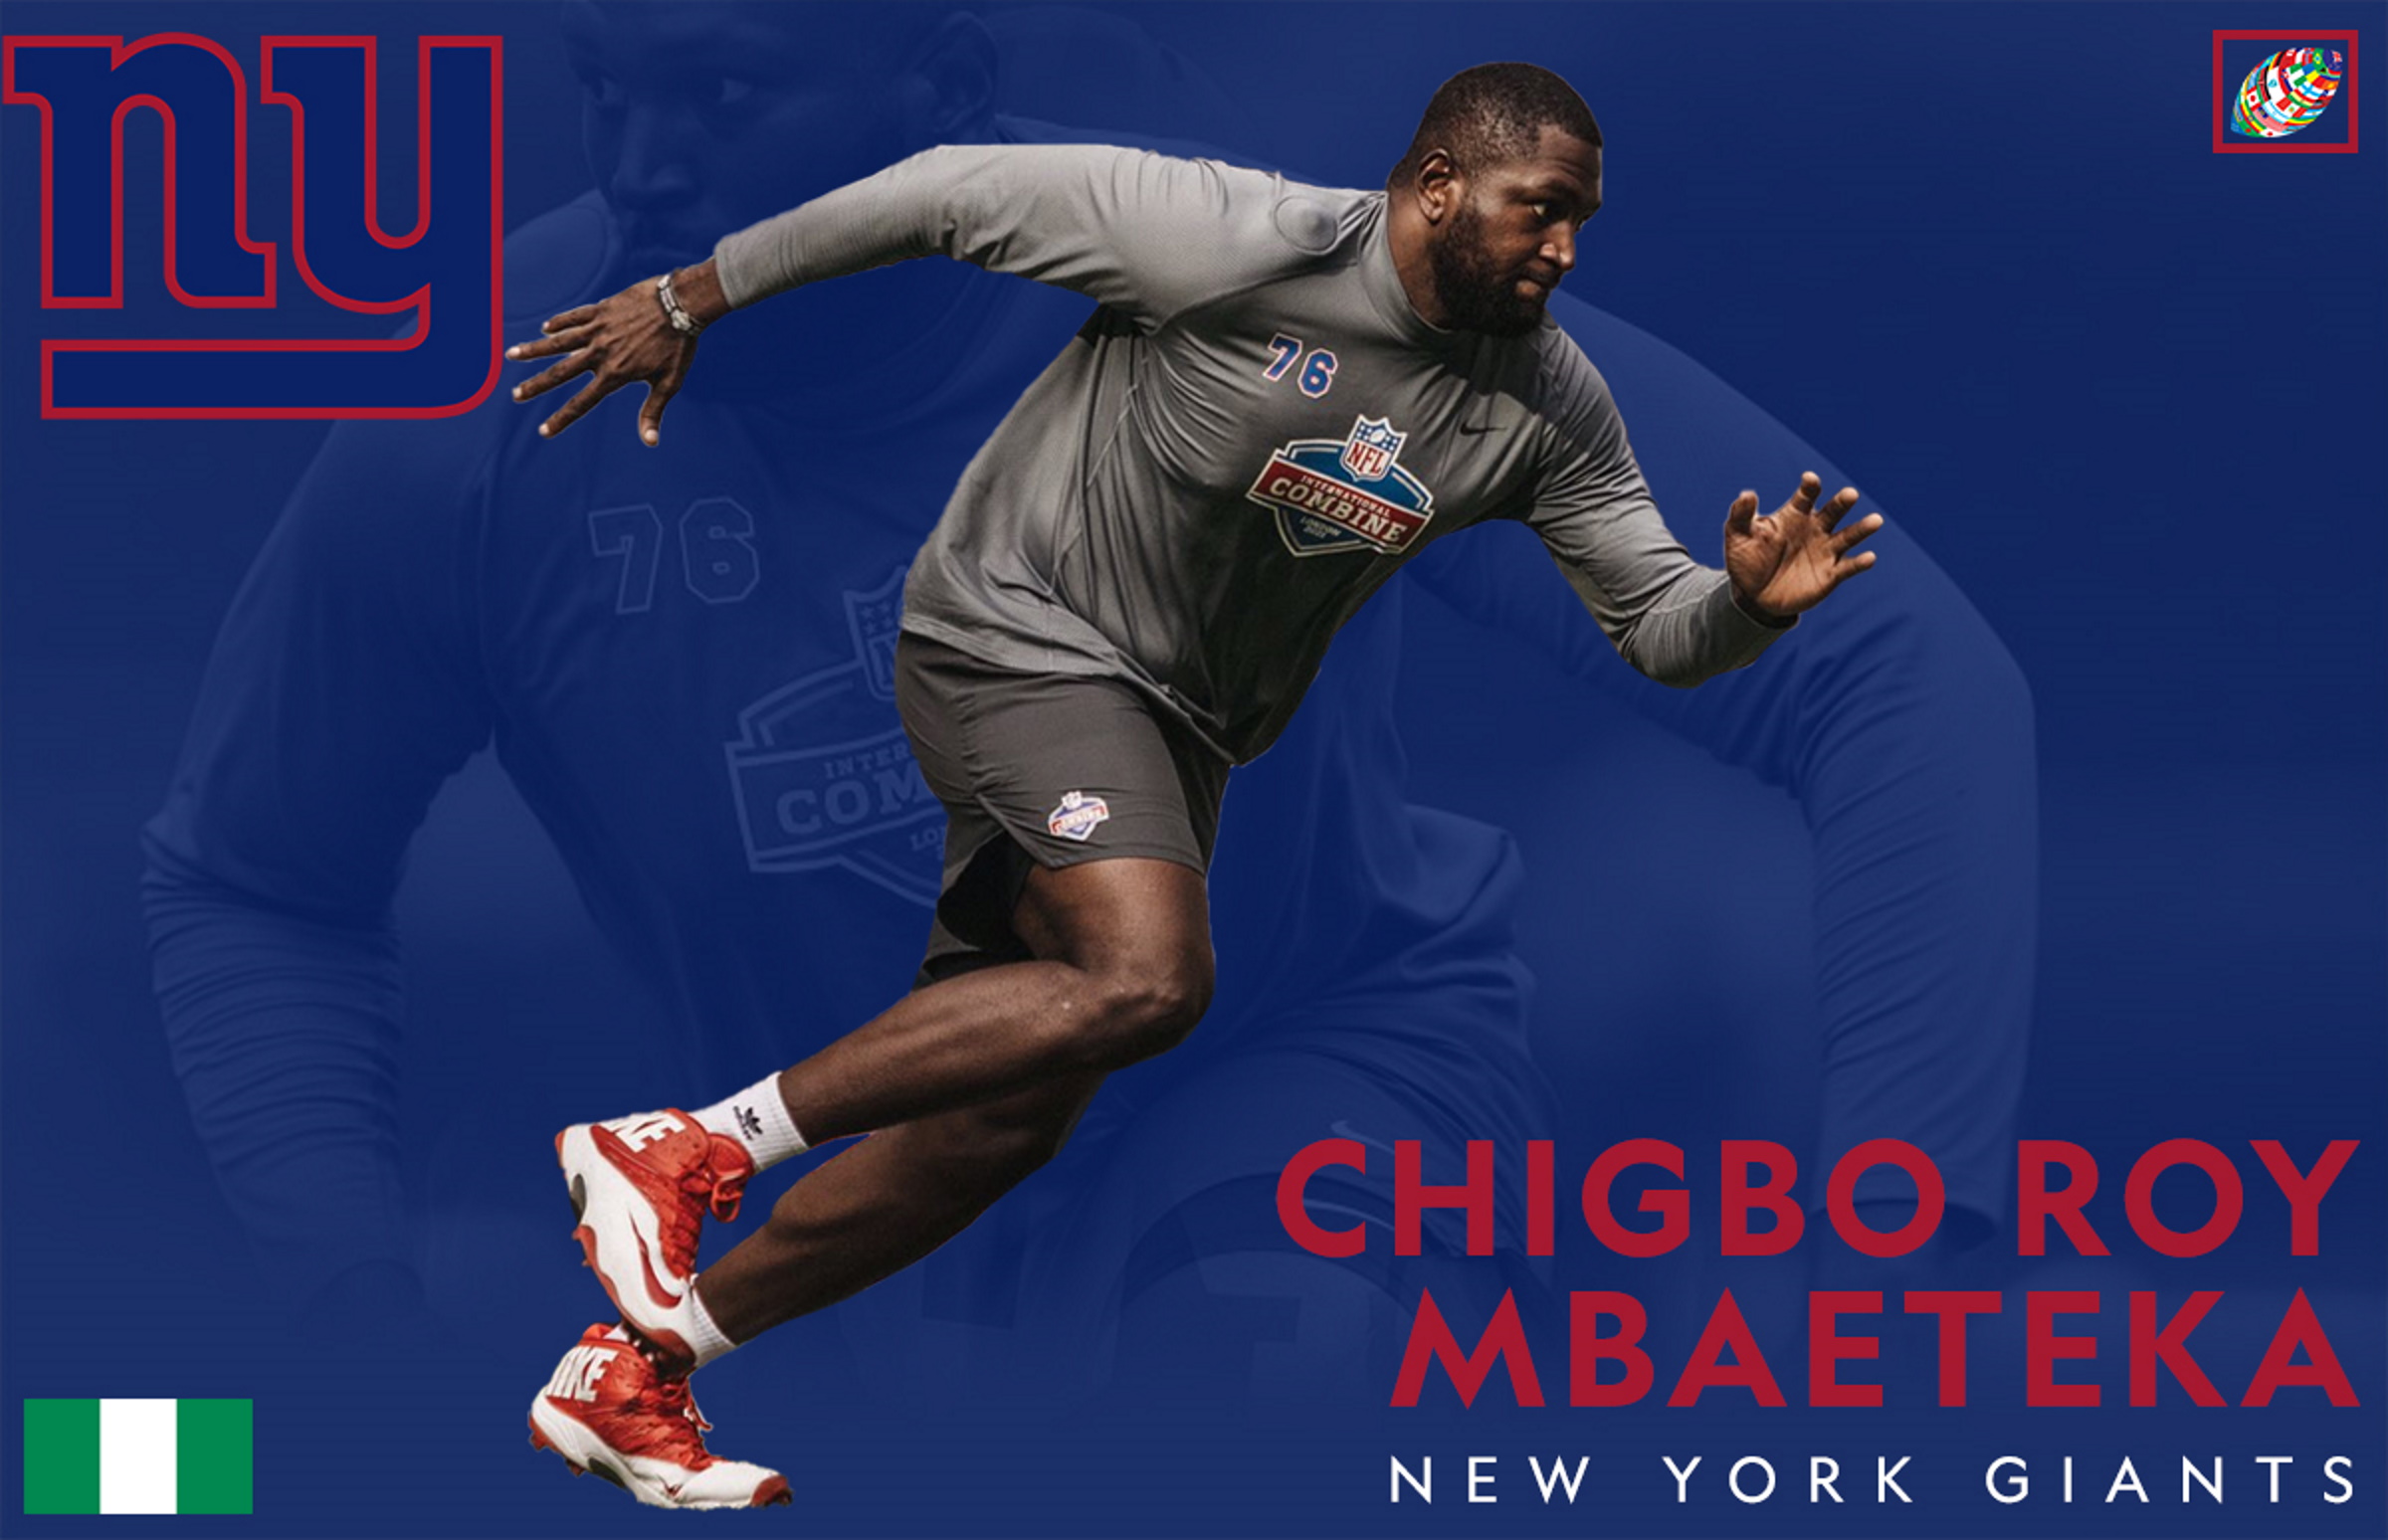 New York Giants sign Nigerian tackle Chigbo Roy Mbaeteka from the NFL's  International Player Pathway Program